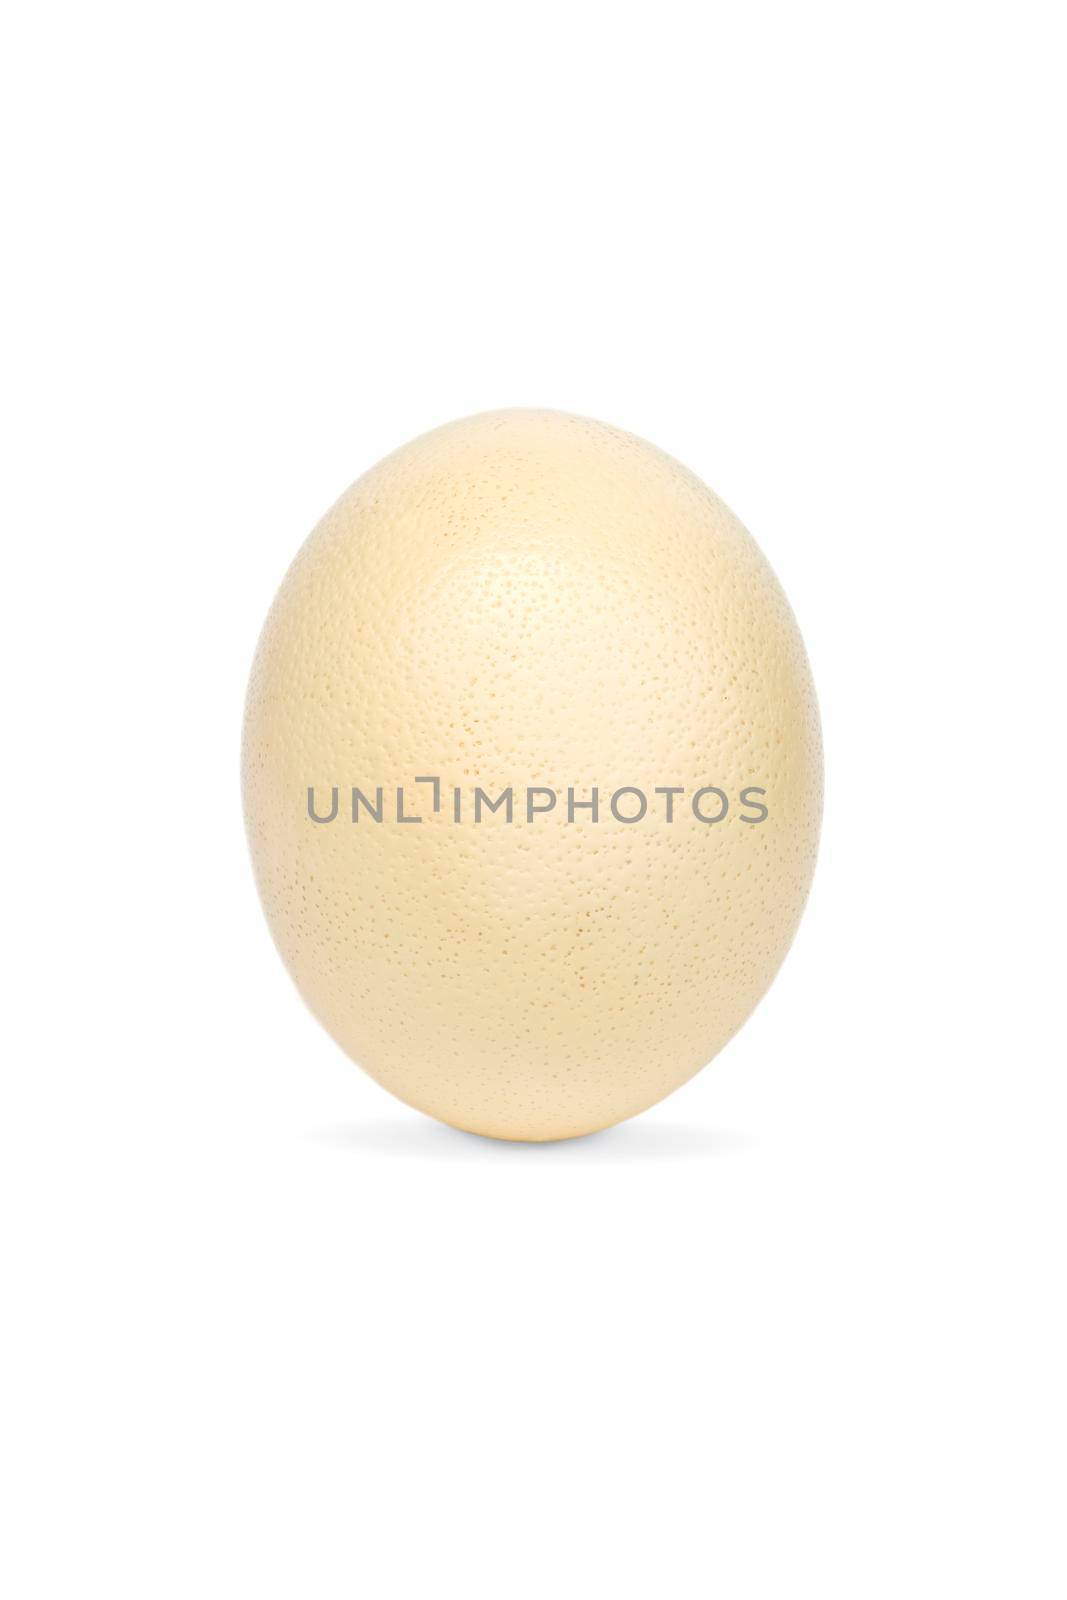 Image of ostrich egg isolated on white background.